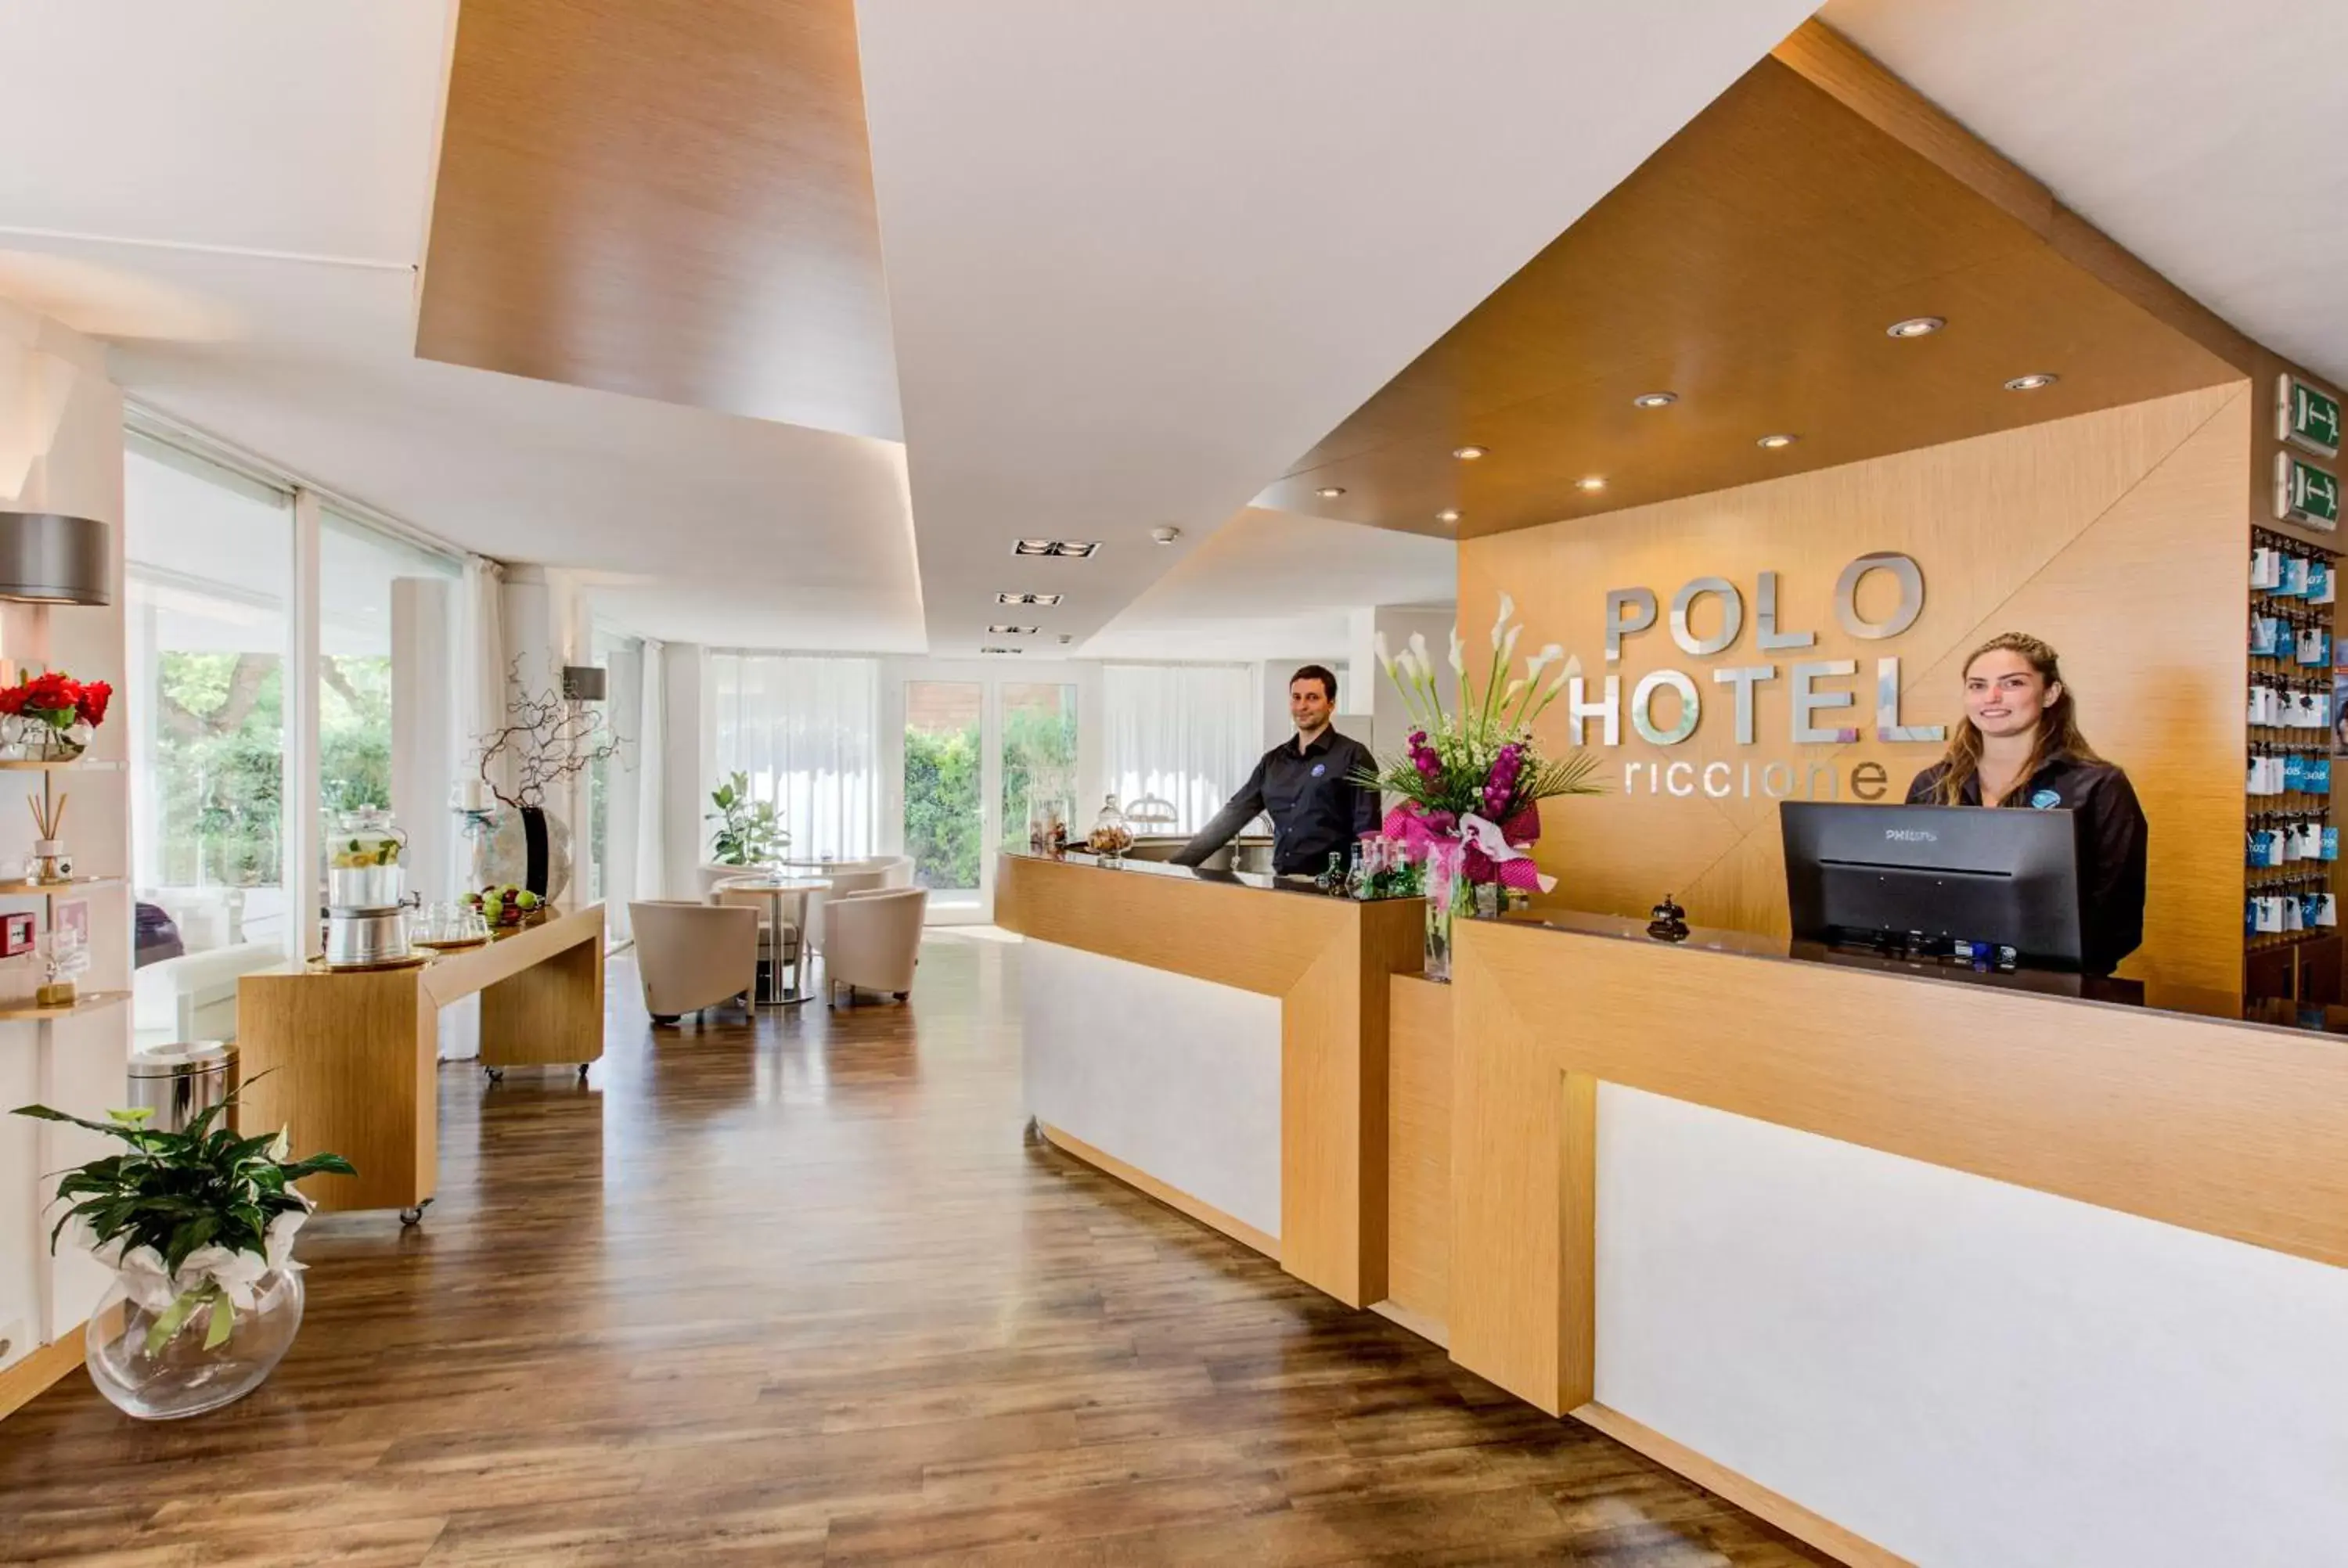 Lobby or reception in BeYou Hotel Polo